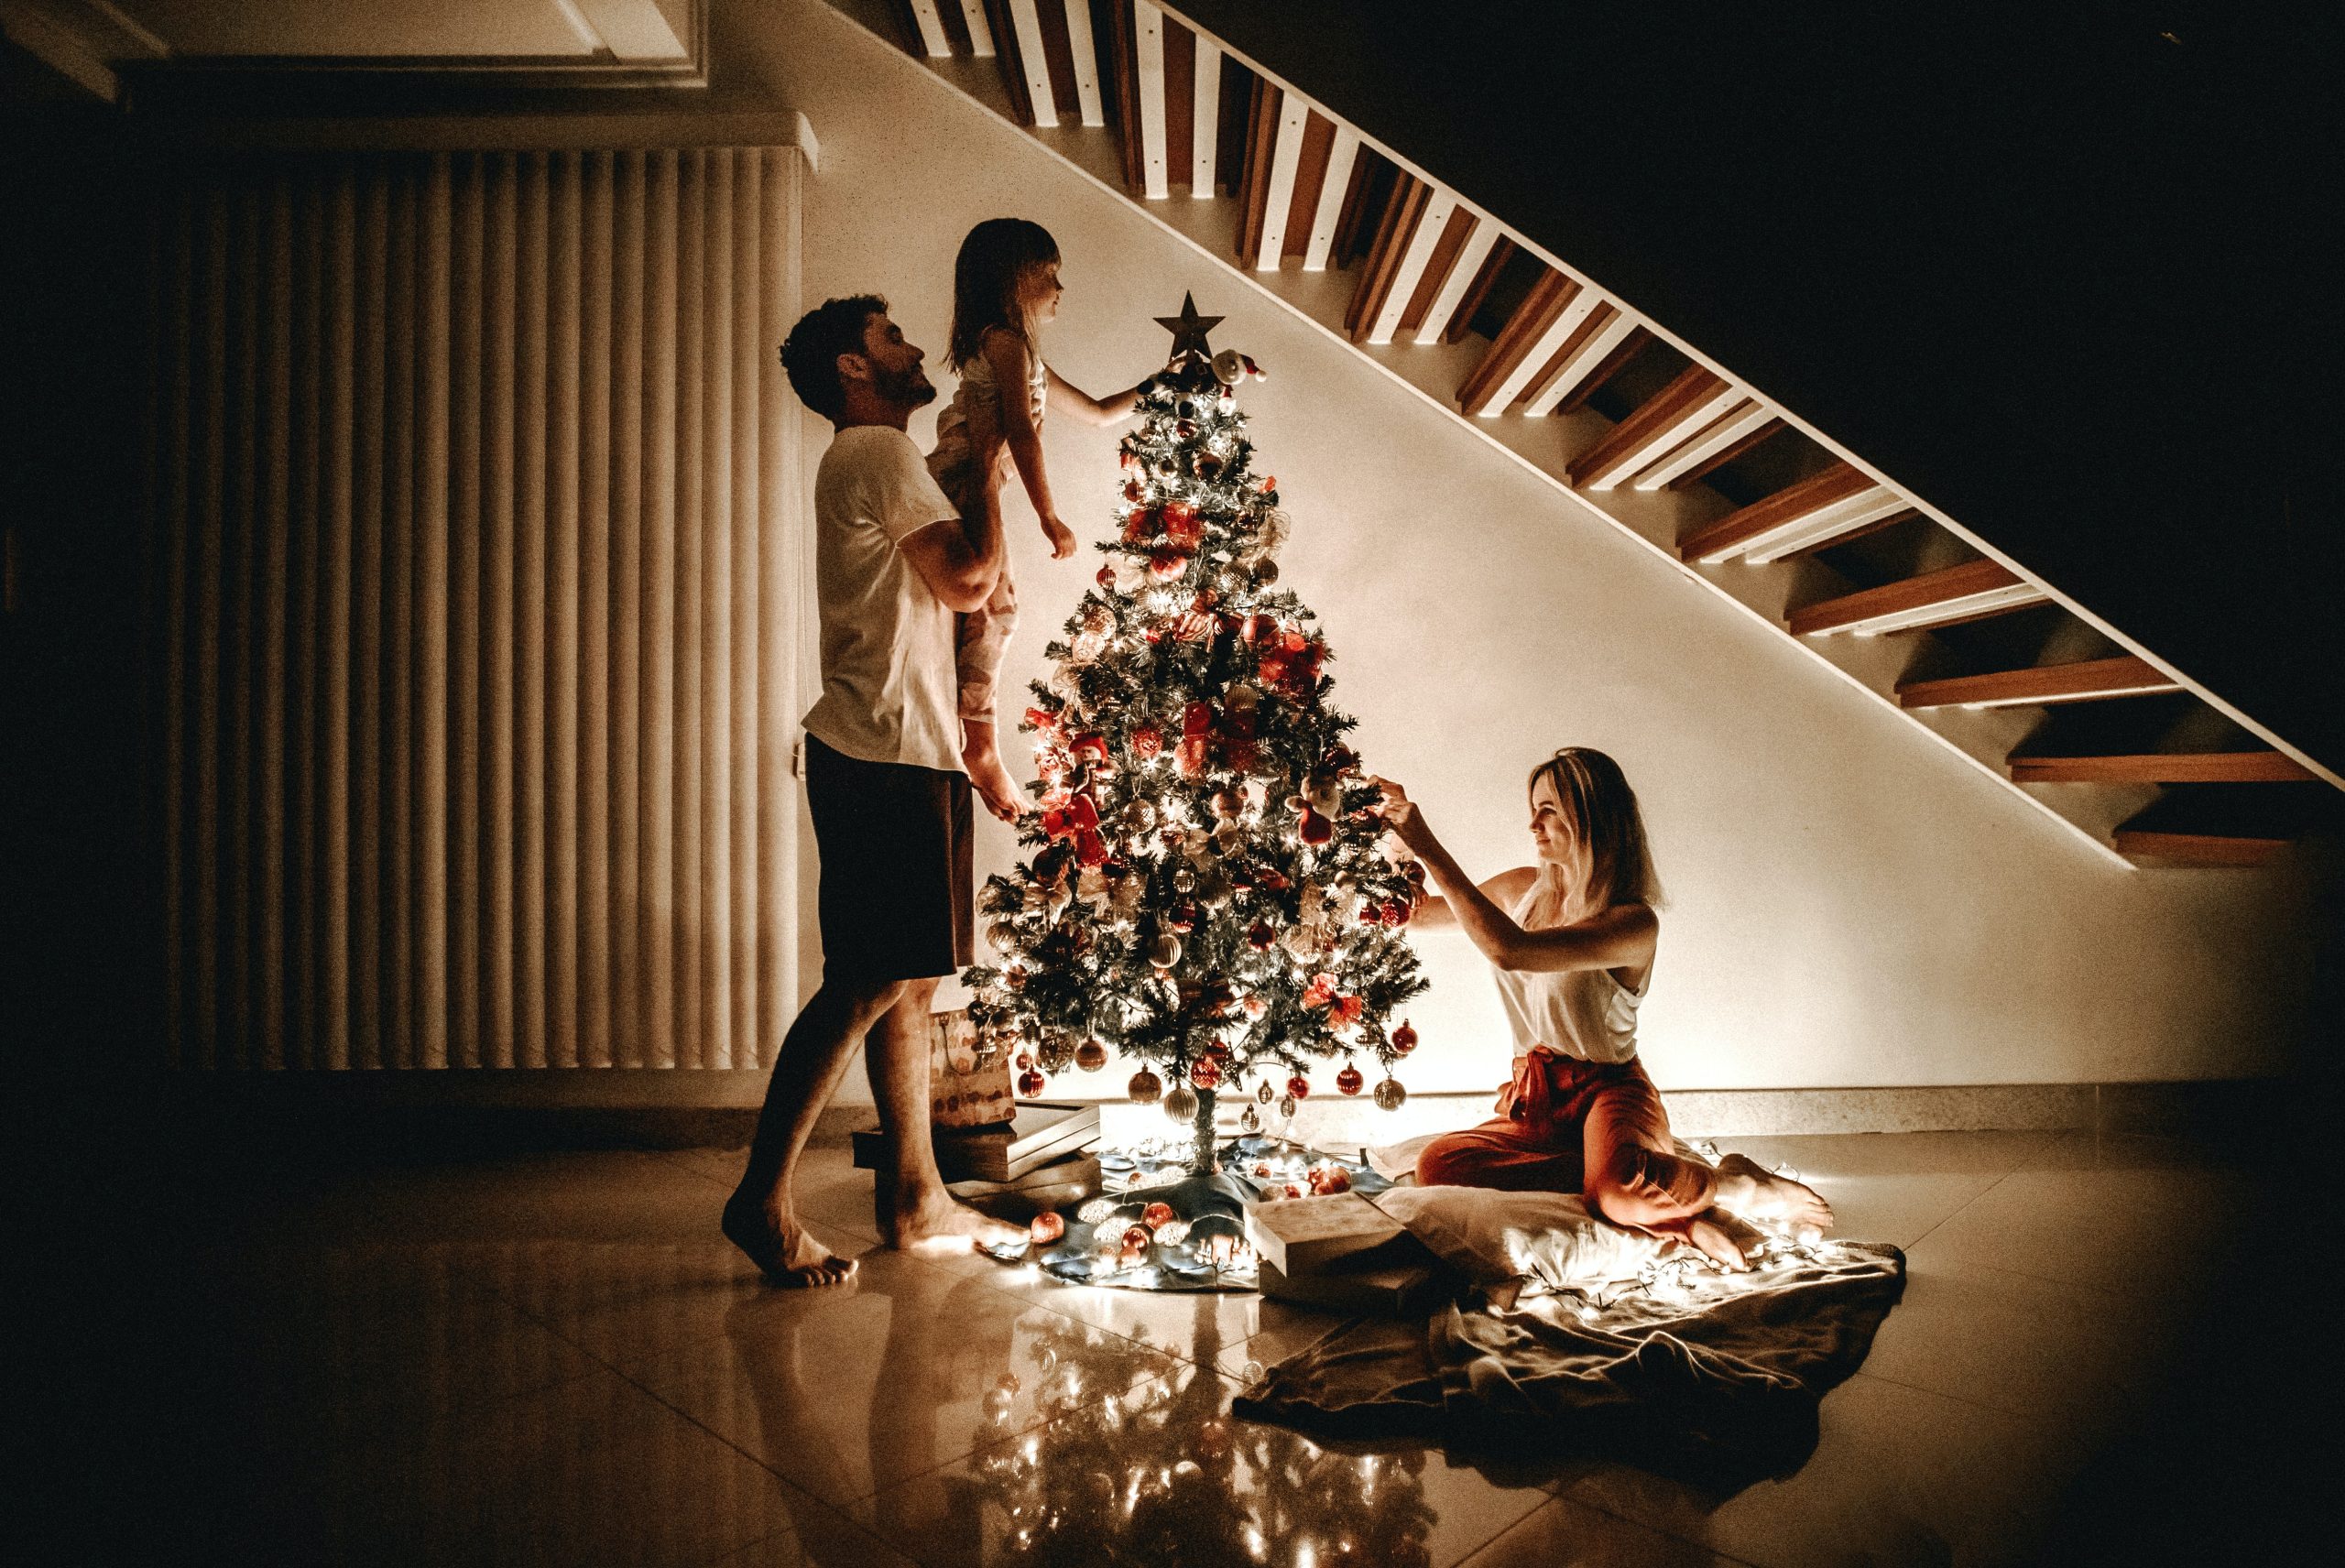 A family decorating their Christmas tree